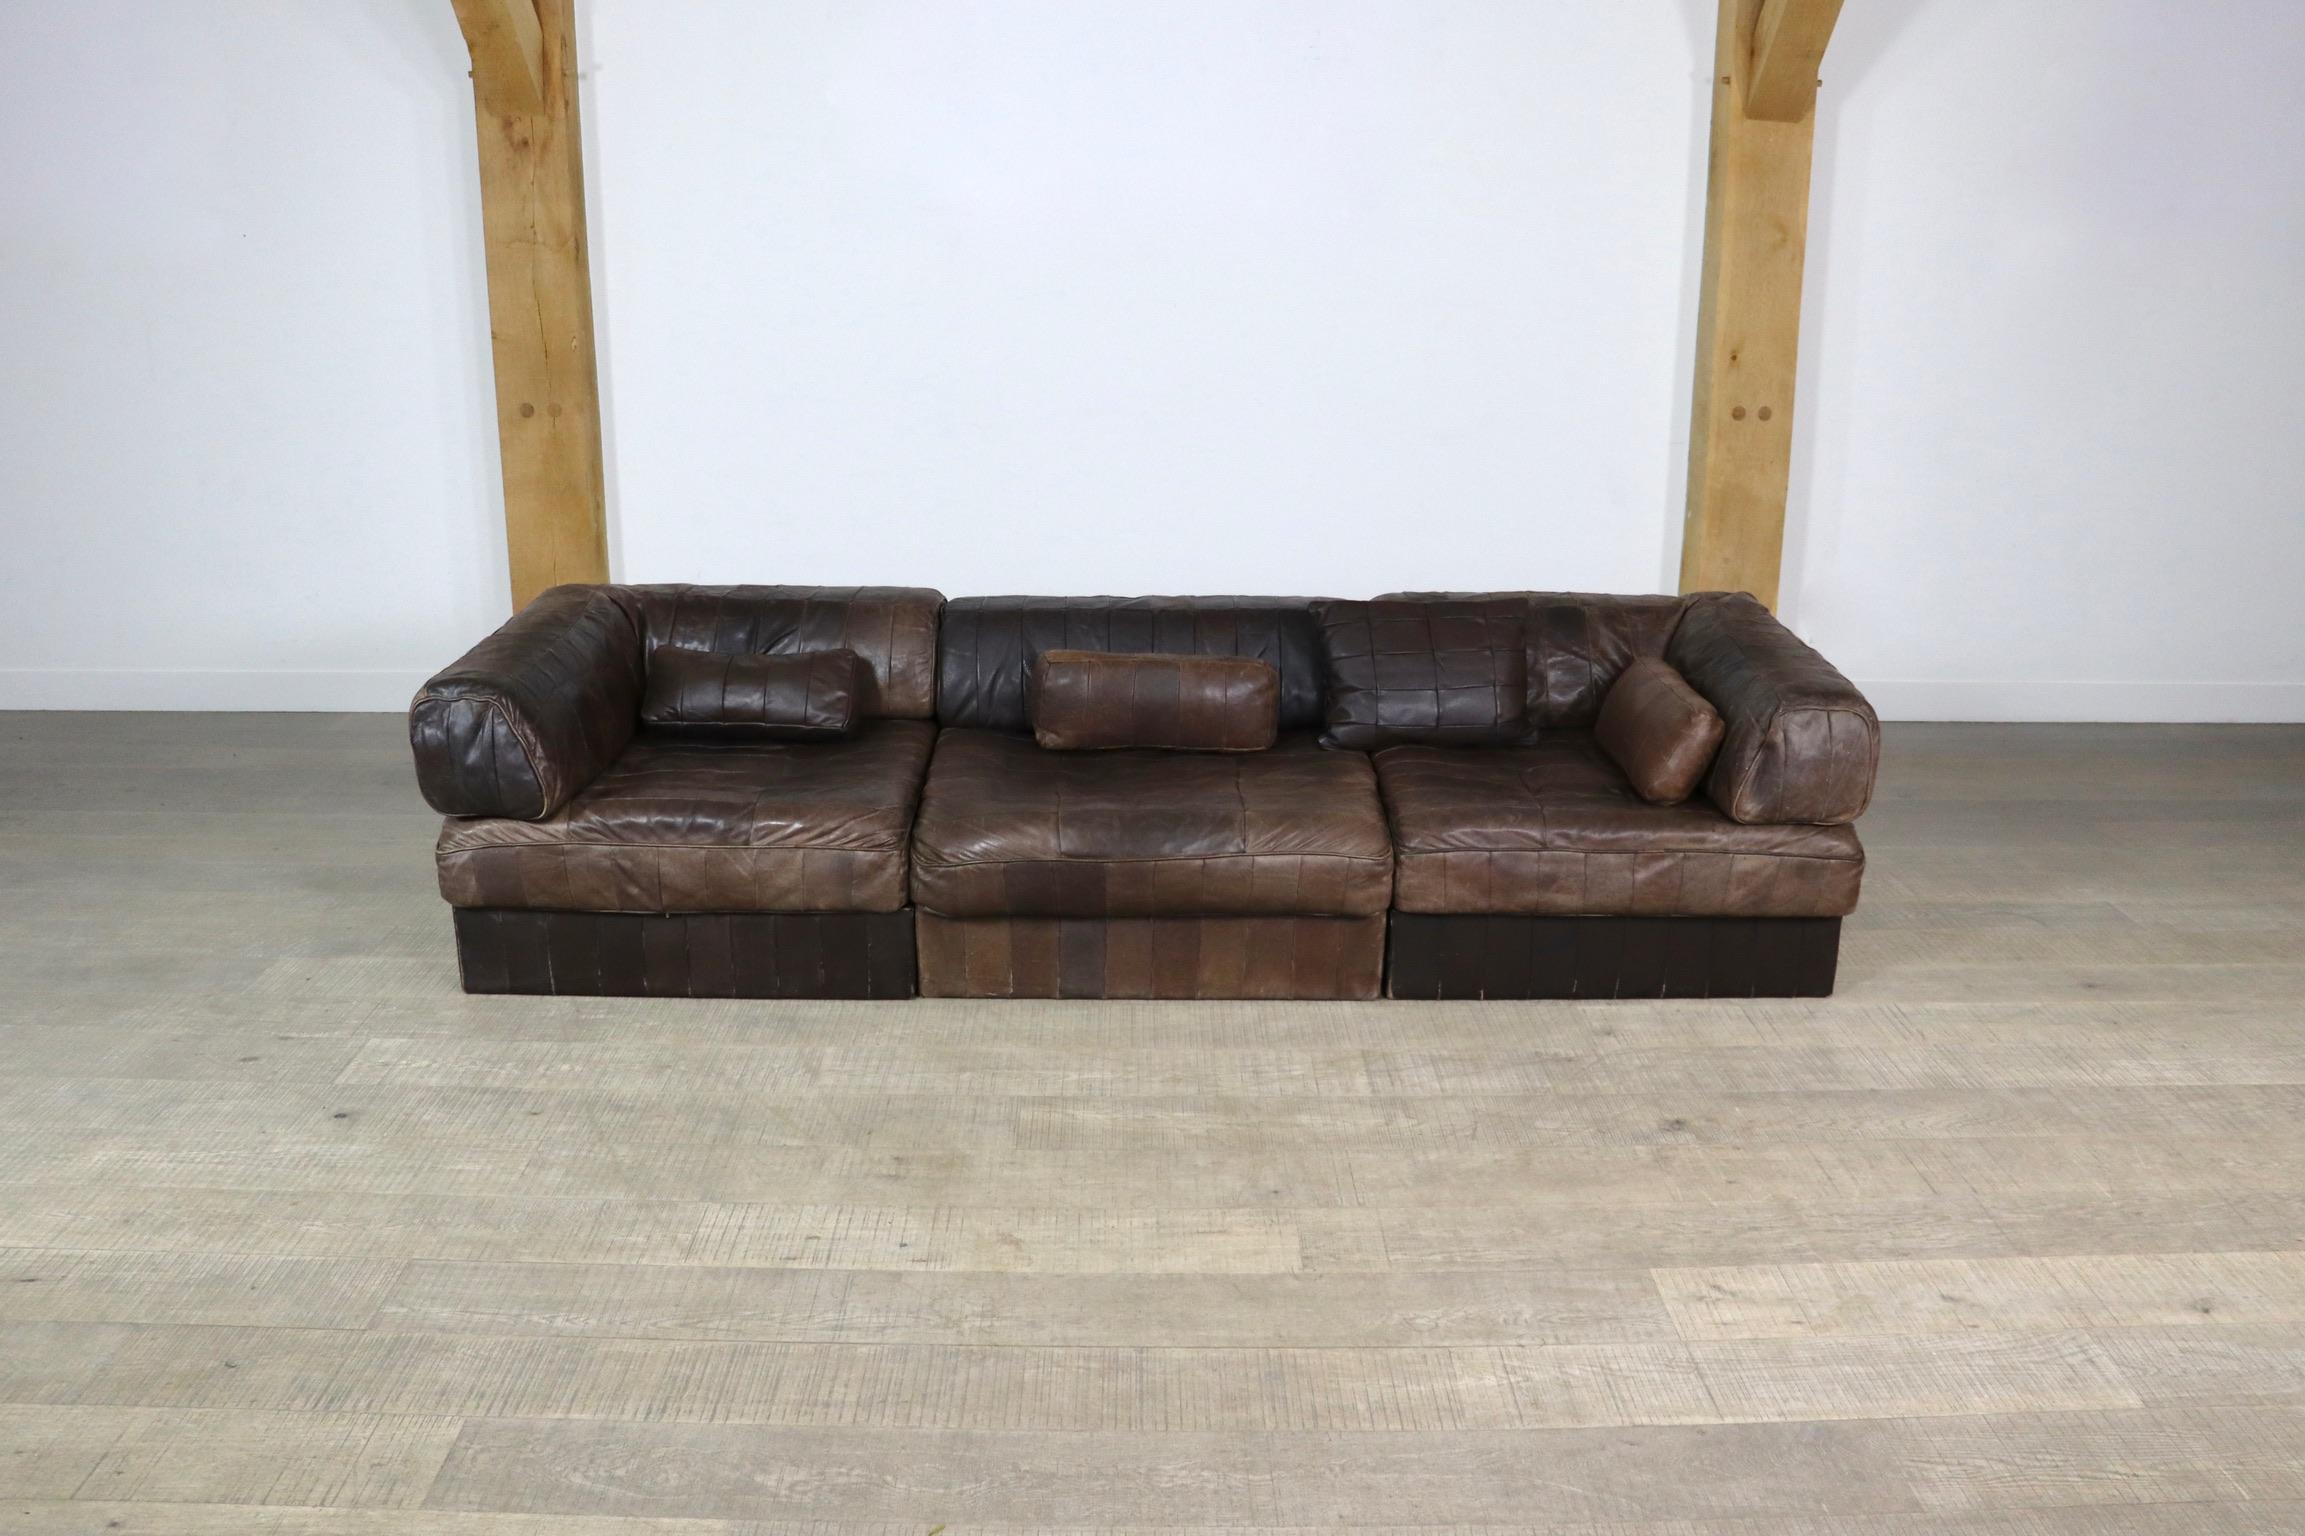 Beautiful DS-88 patchwork leather sofa designed and manufactured by De Sede, Switzerland 1970s. The sofa consists of 3 elements, of which one corner, each with a dark brown leather patchwork base, seating cushion and back cushion made from the same